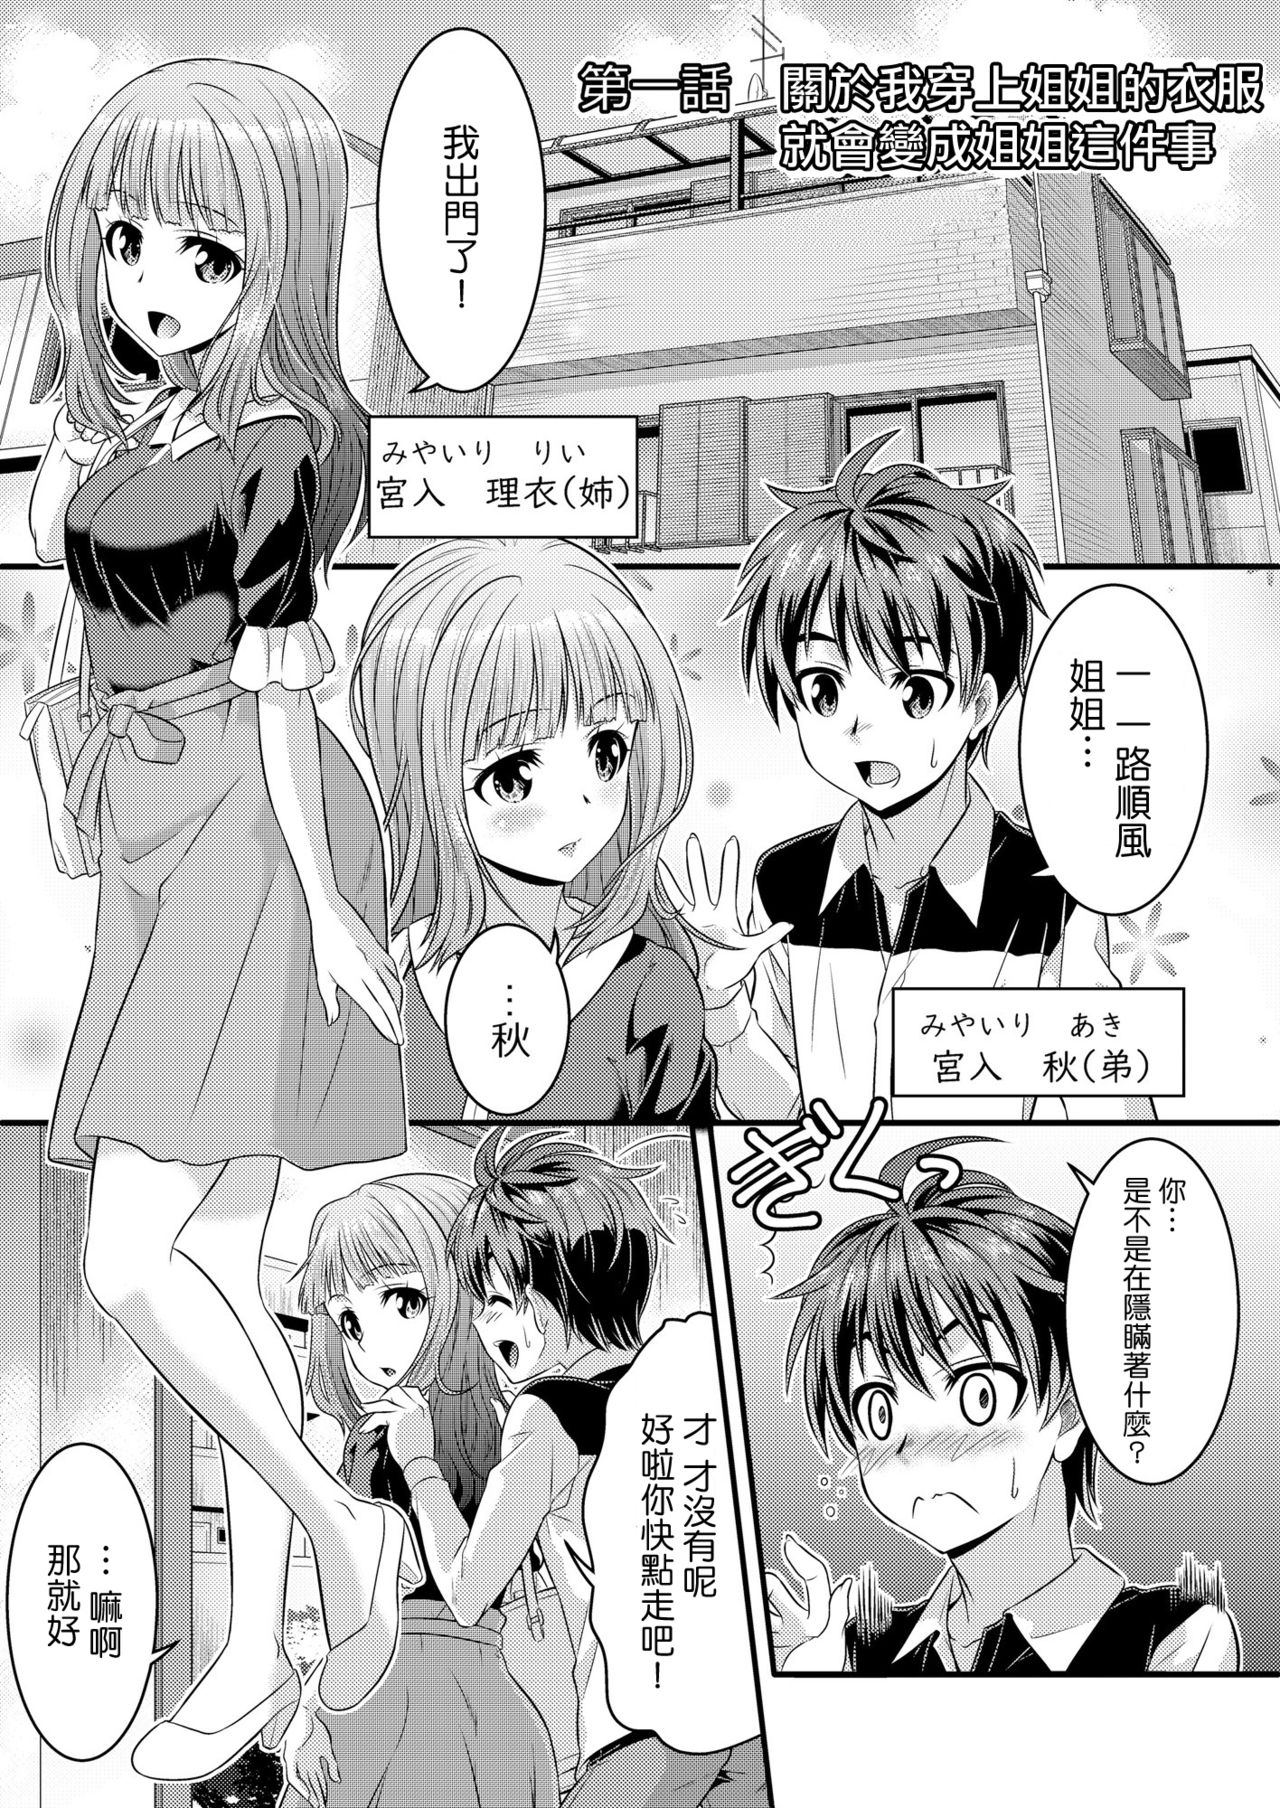 Metamorph ★ Coordination - I Become Whatever Girl I Crossdress As~ [Sister Arc, Classmate Arc] [Chinese] [瑞树汉化组] page 2 full